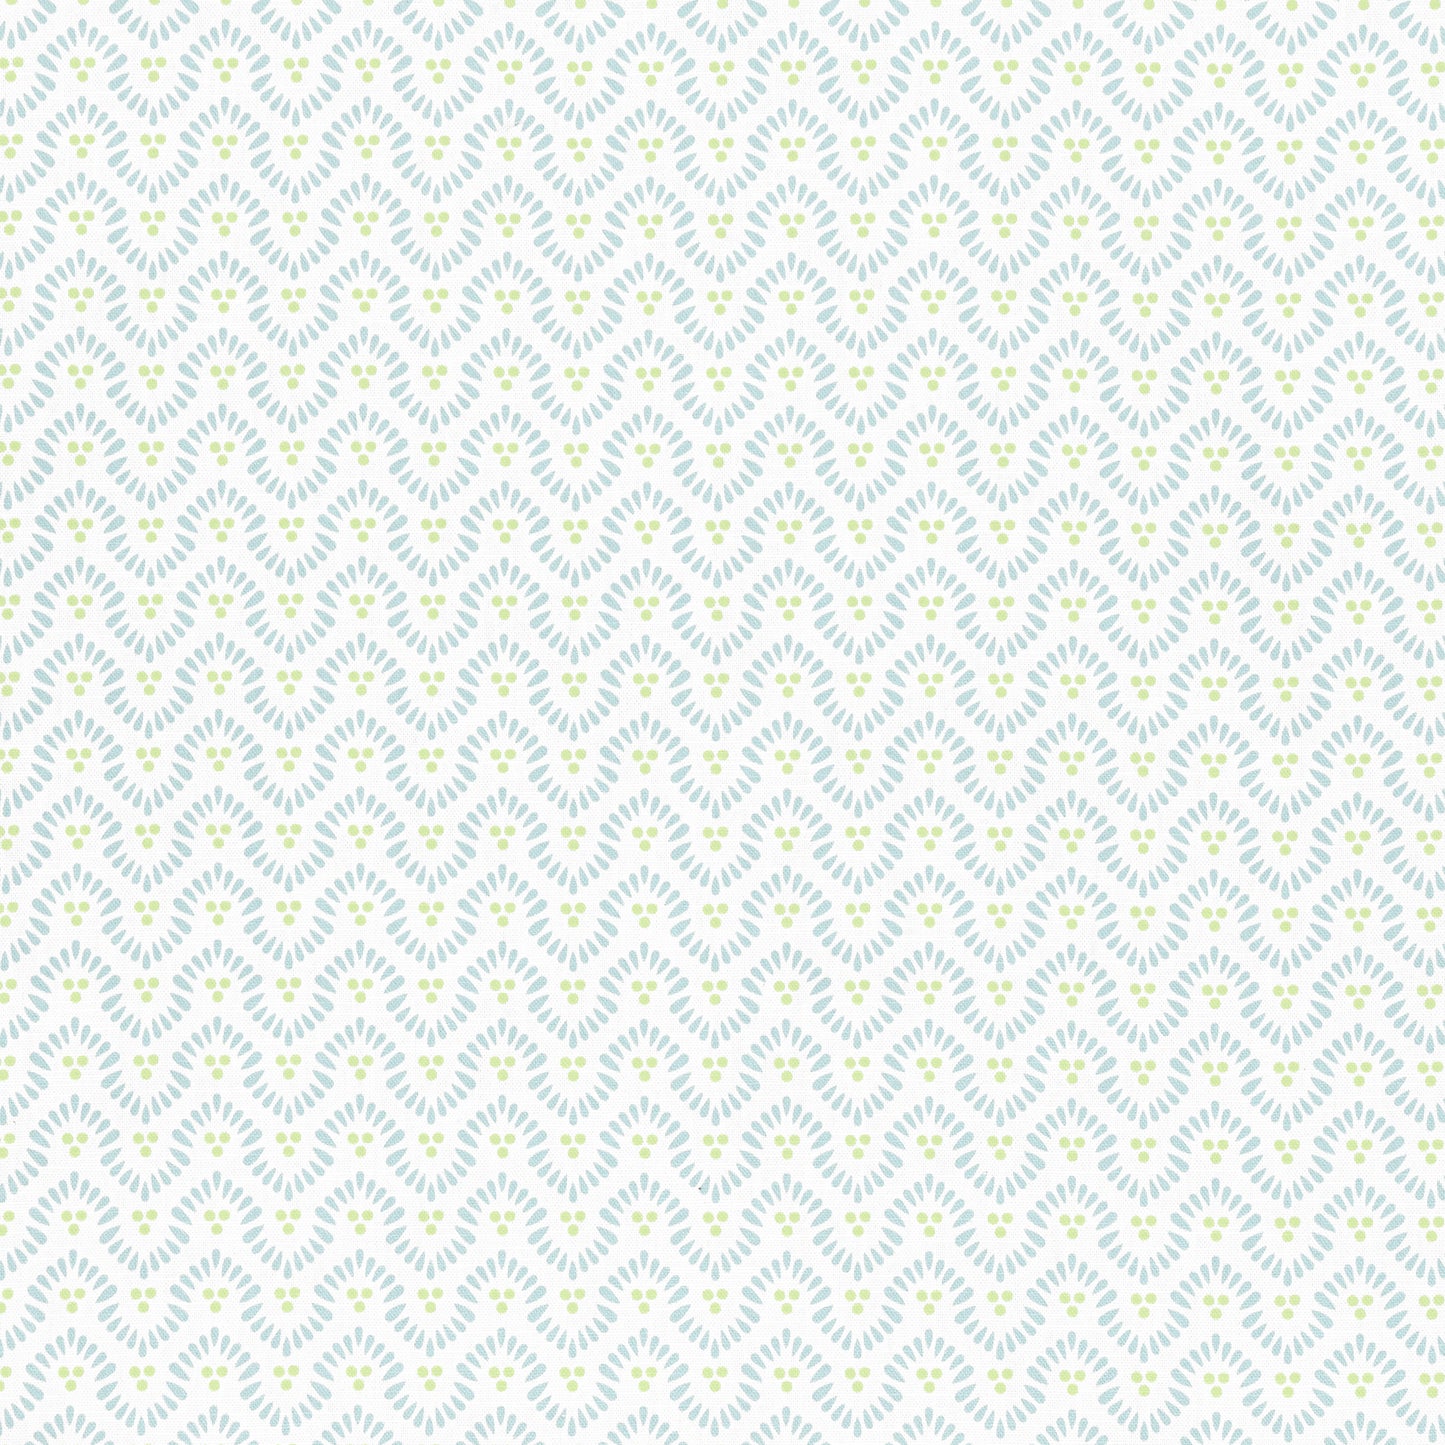 Purchase  Ann French Fabric Product AF23145  pattern name  Wynford